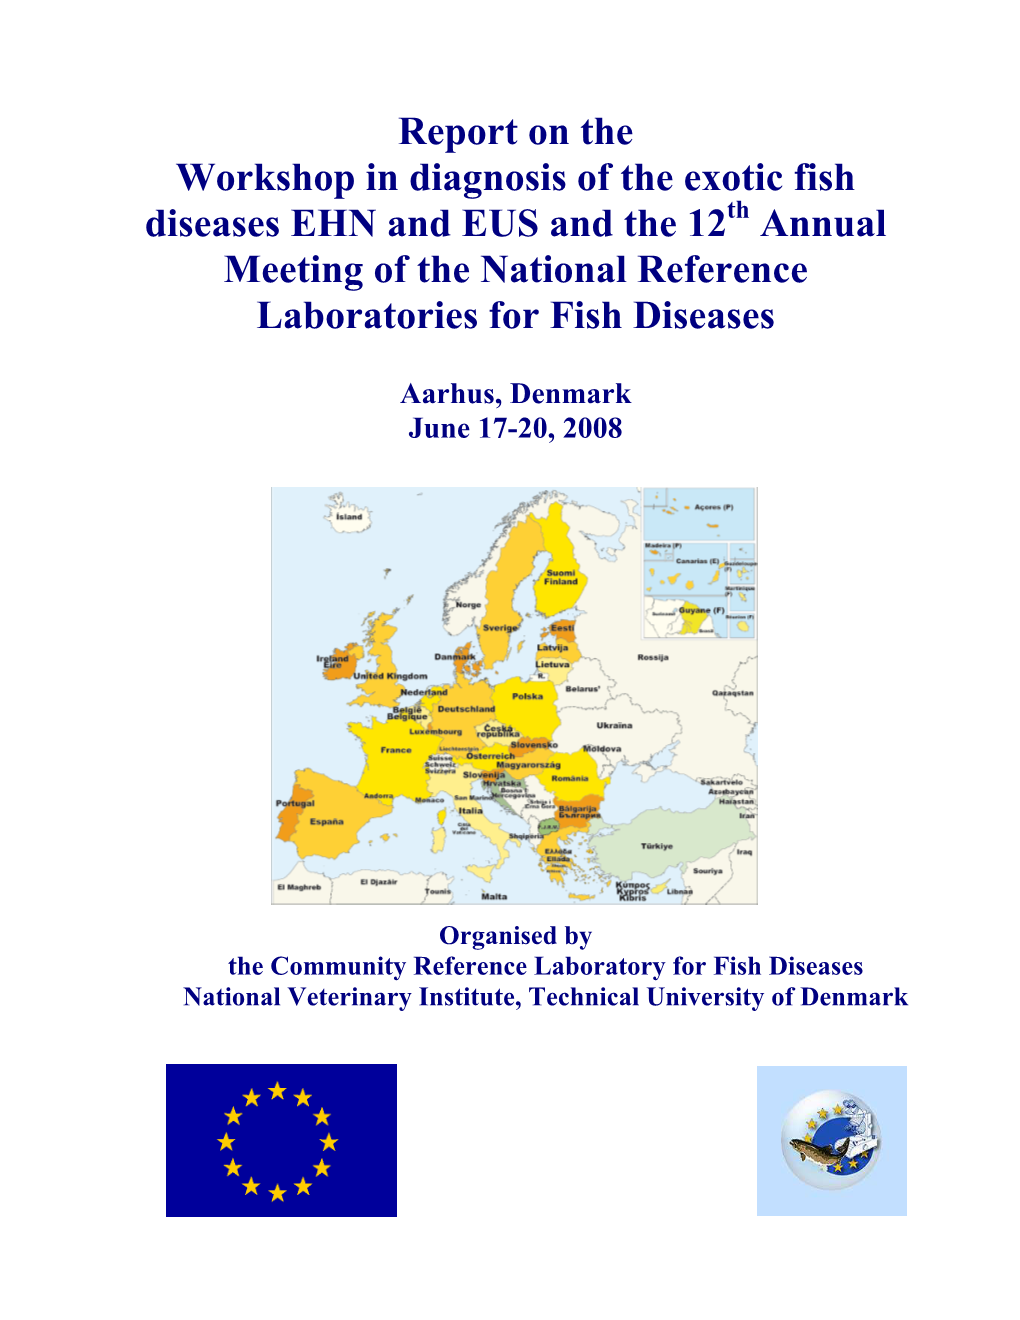 Report on the Workshop in Diagnosis of the Exotic Fish Diseases EHN and EUS and the 12Th Annual Meeting of the National Reference Laboratories for Fish Diseases